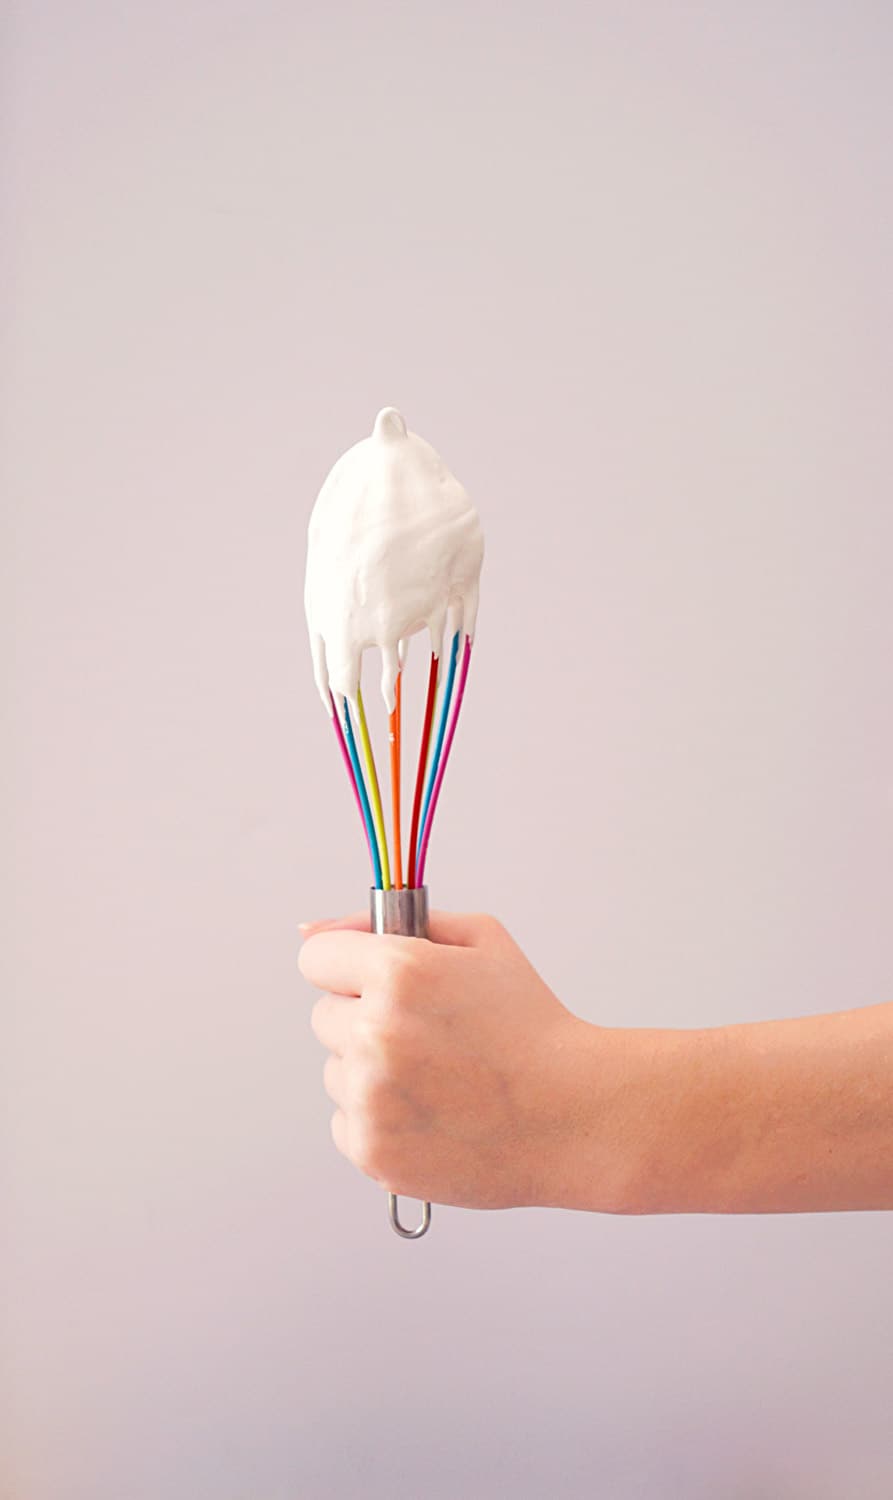 A hand holding a whisk covered in buttercream icing.